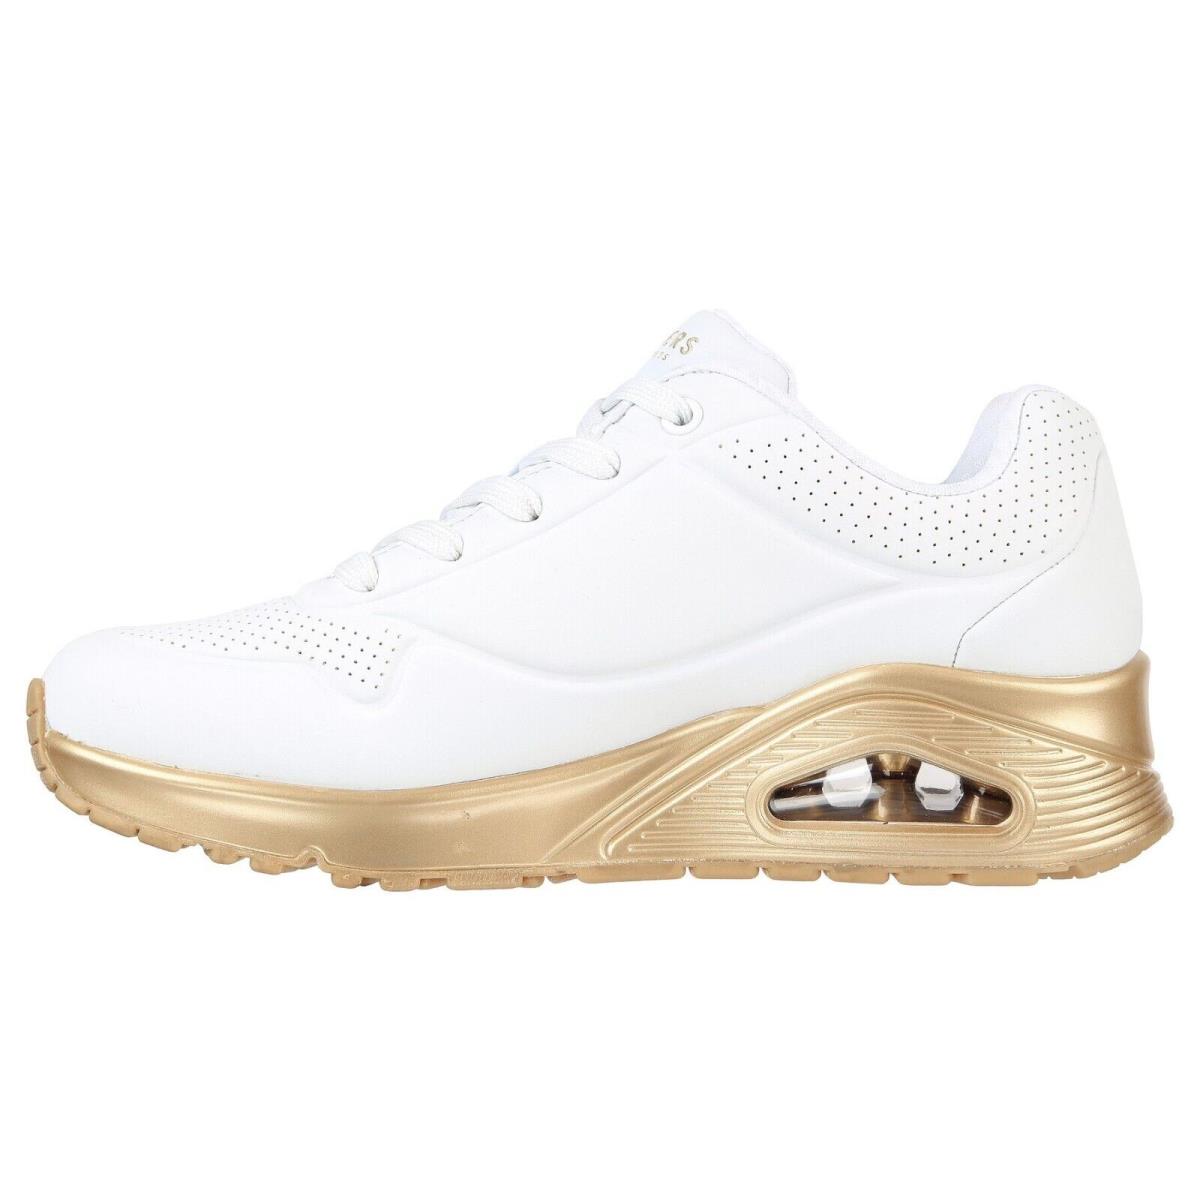 Skechers shoes Uno Gold Soul - White/Gold 3